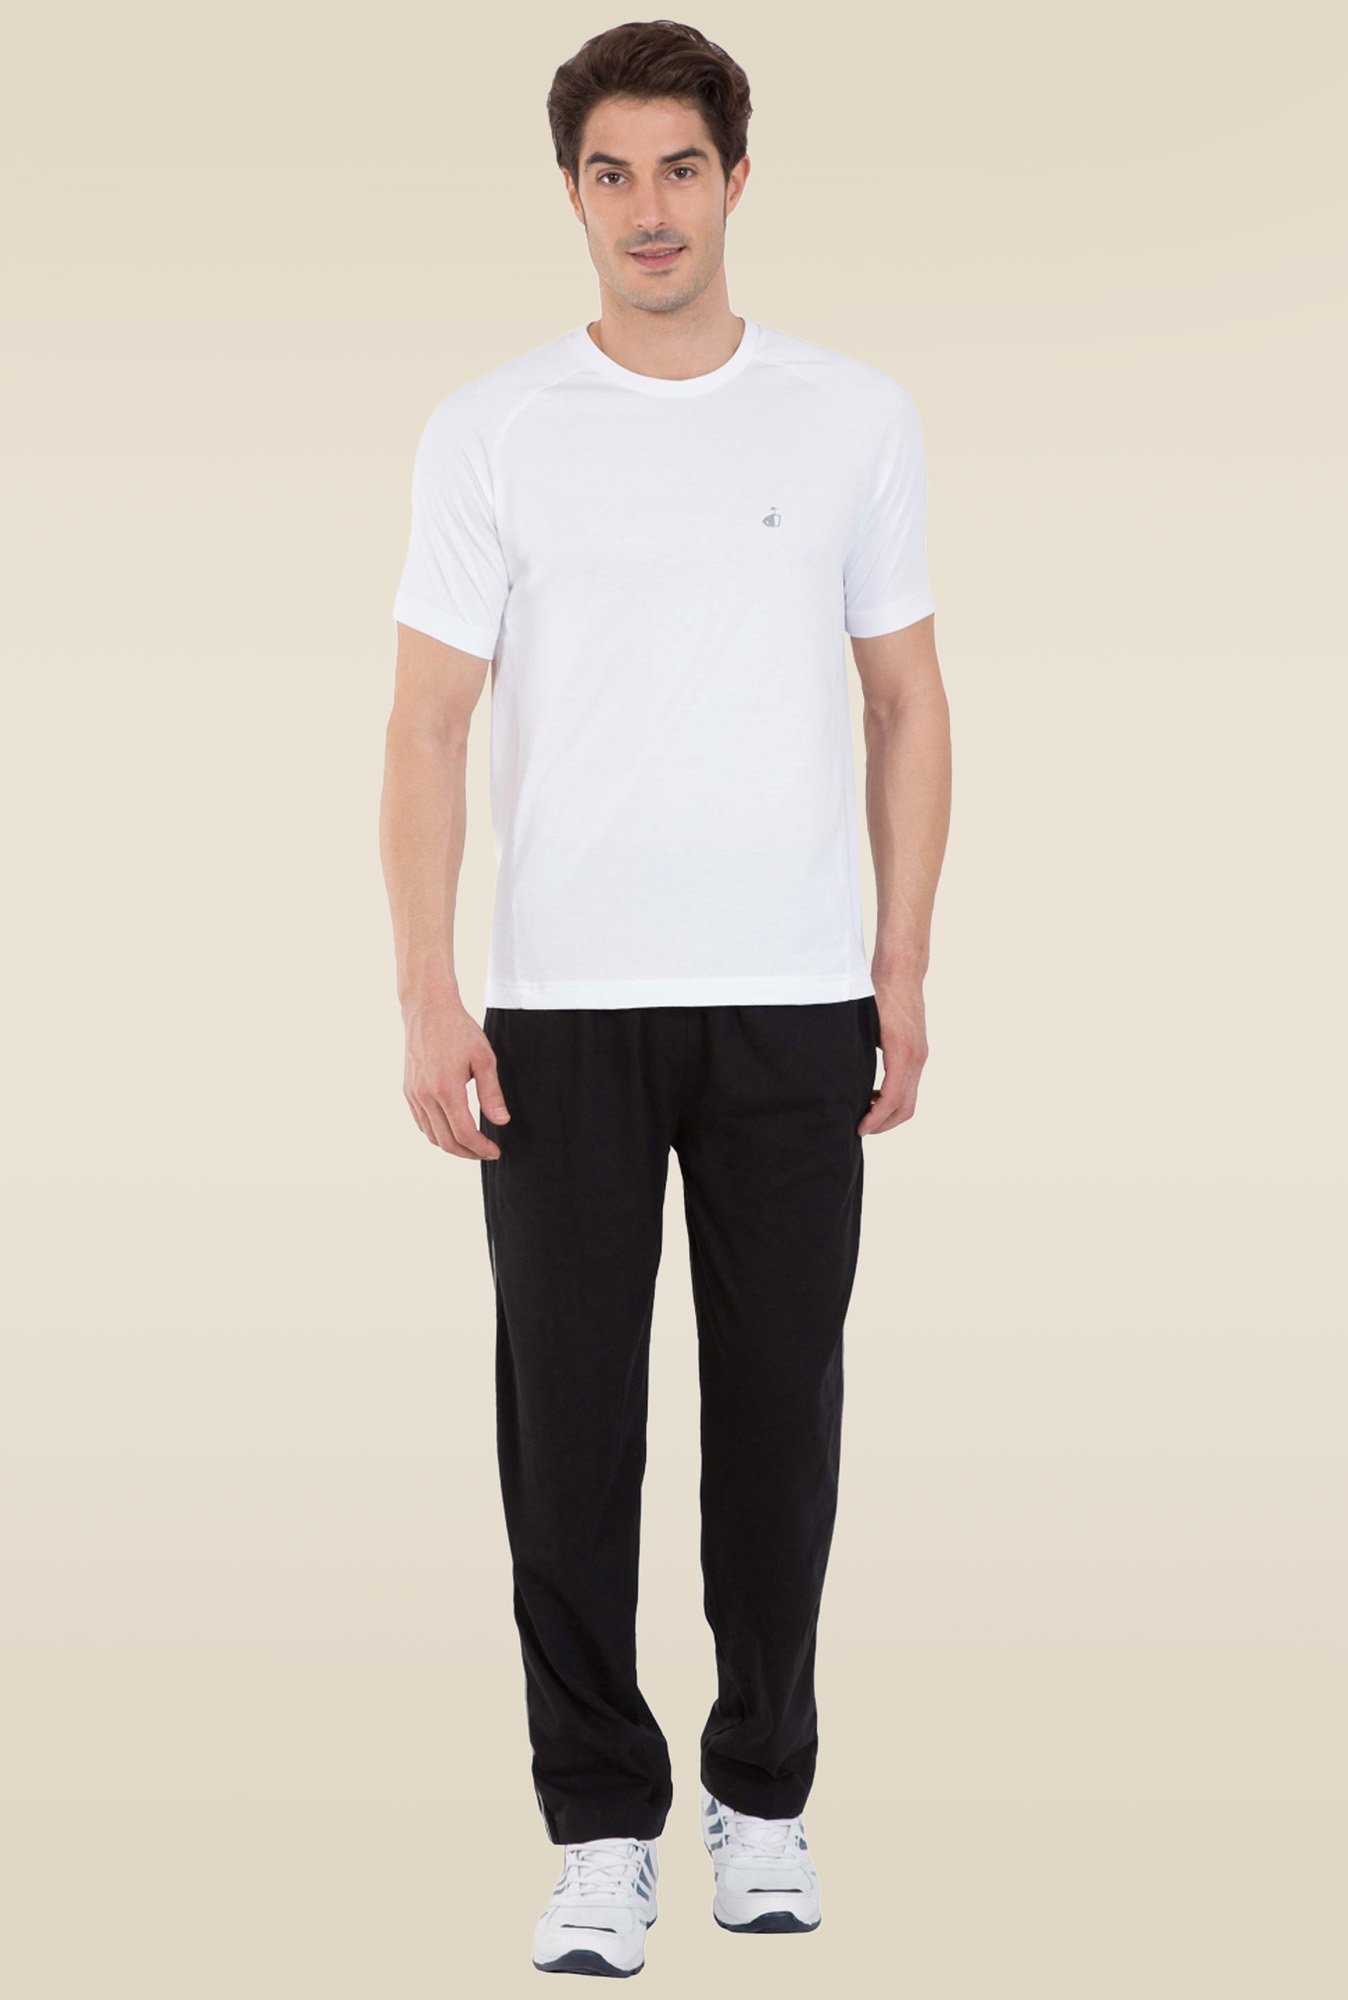 Jockey Black Track Pant Style NumberAW60 Buy Jockey Black Track Pant  Style NumberAW60 Online at Best Price in India  Nykaa